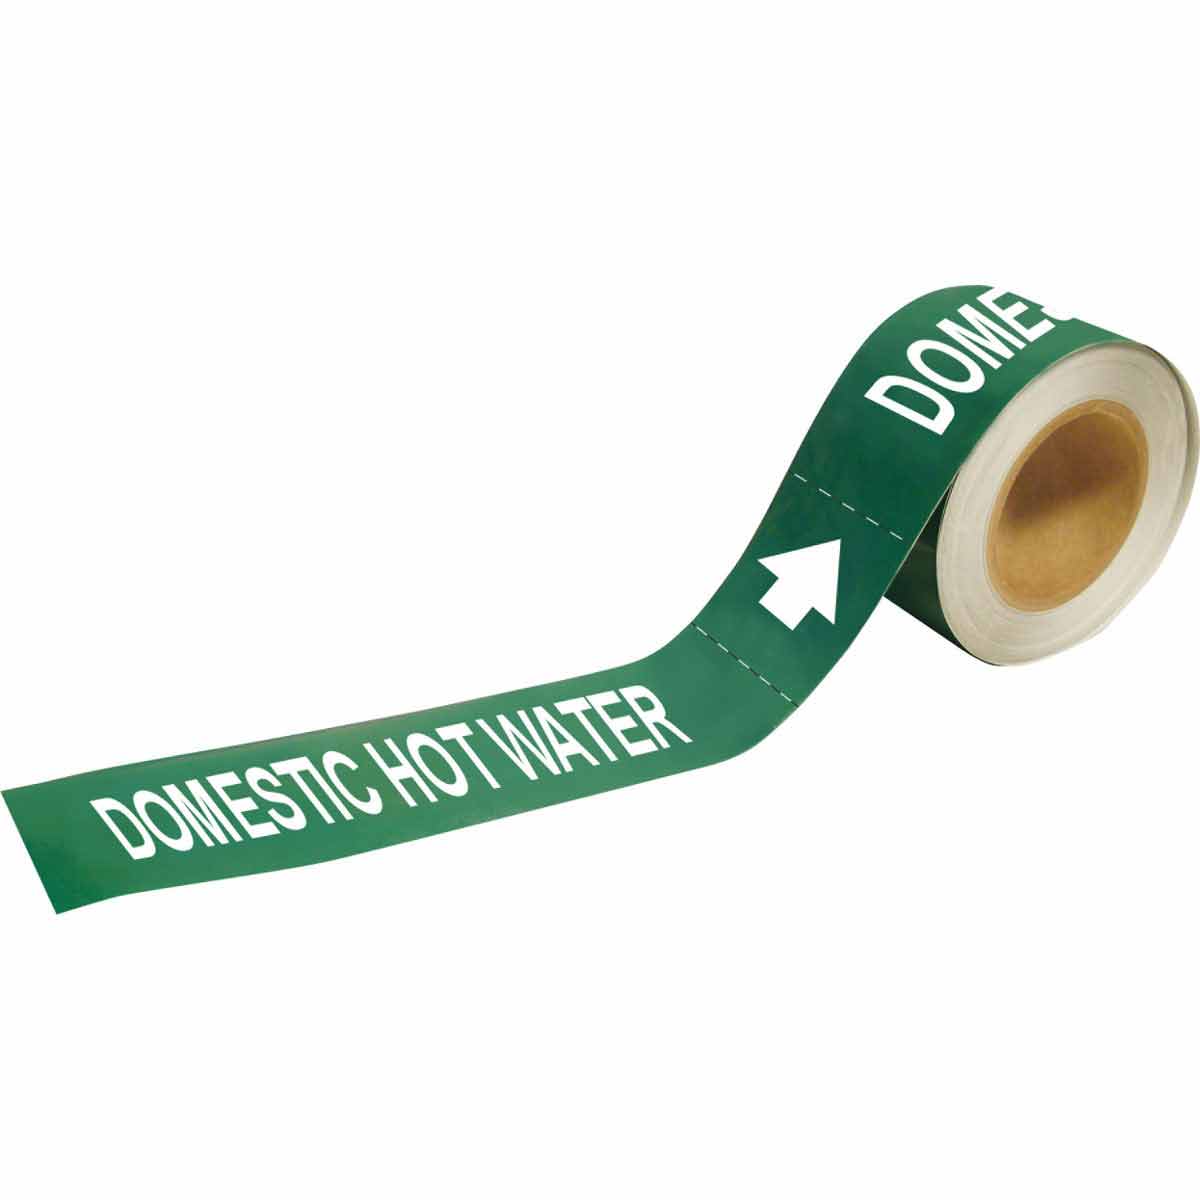 DOMESTIC HOT WATER WHITE / GREEN